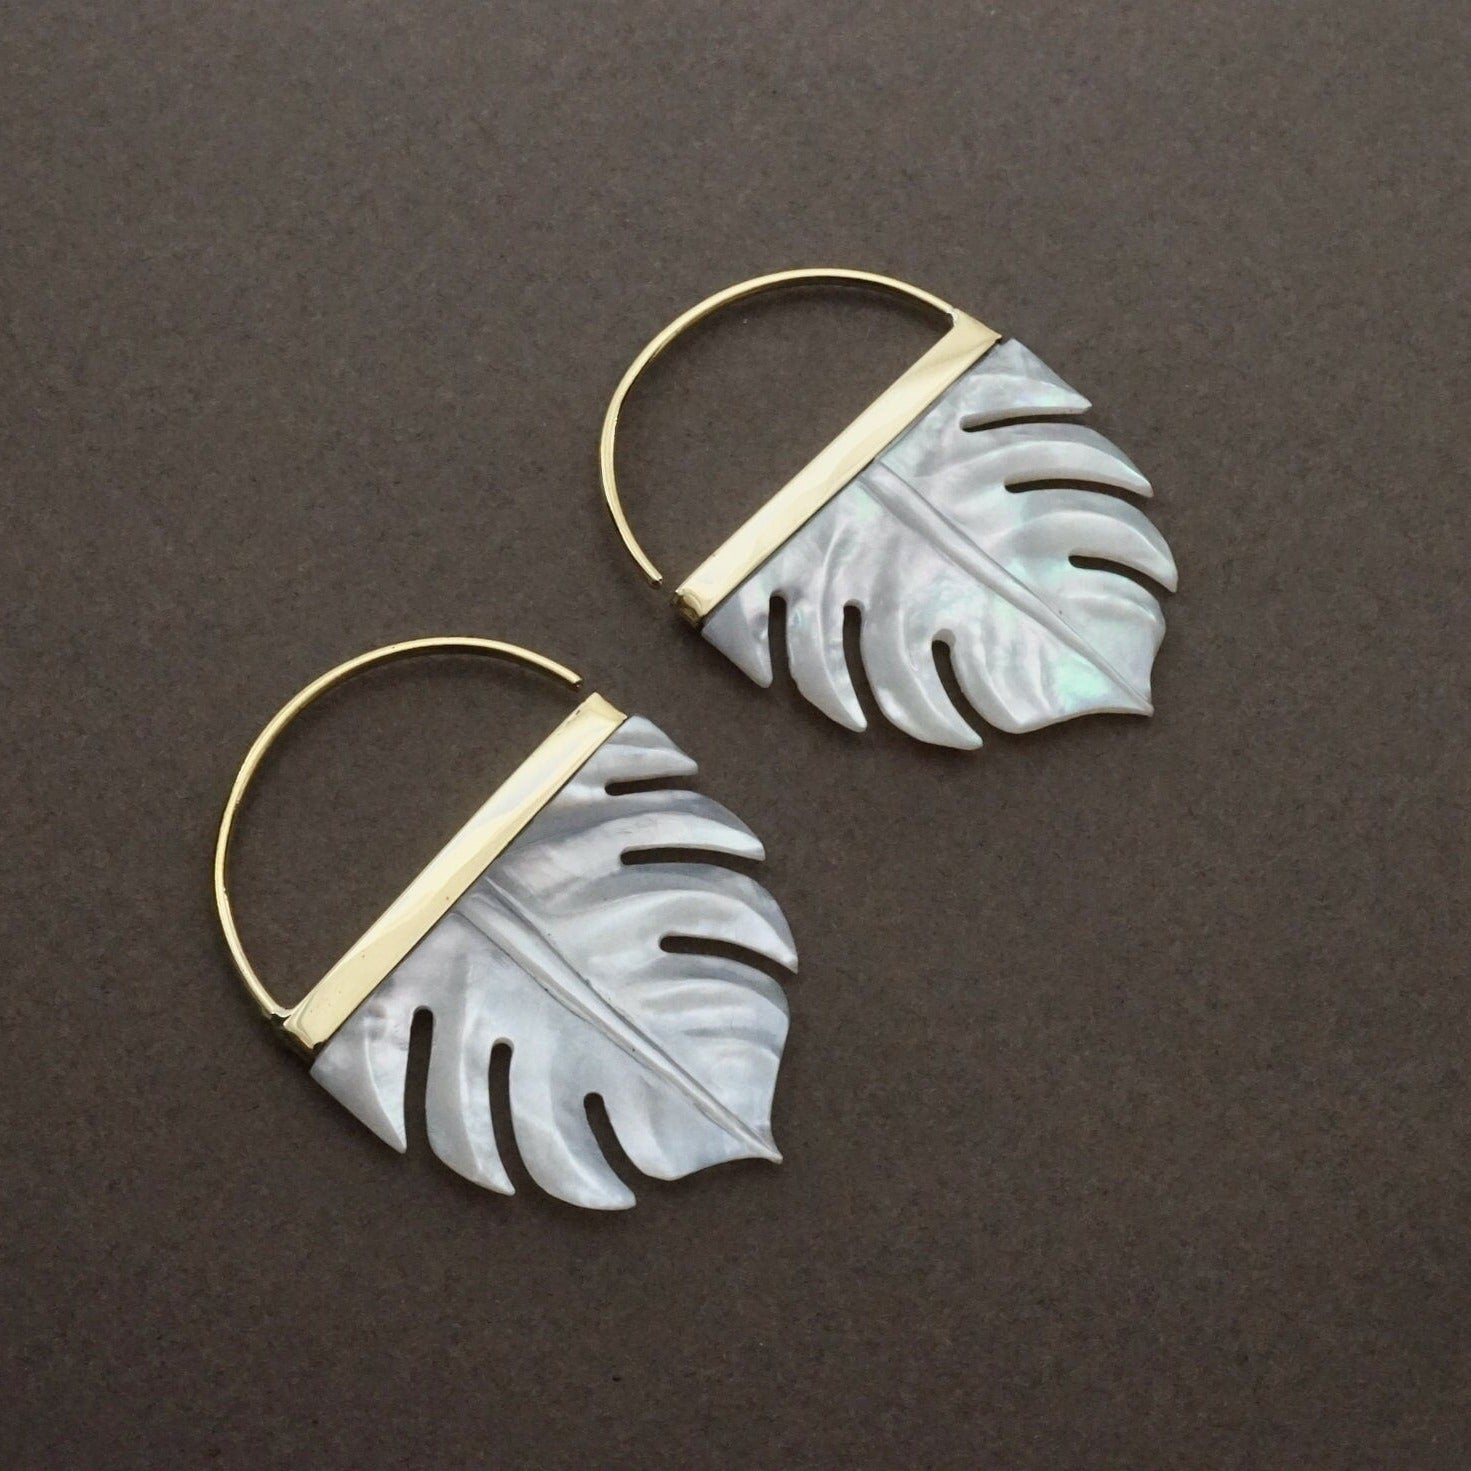 Tropical leaf Earrings in mother of pearl with gold-tone bezel (b254)